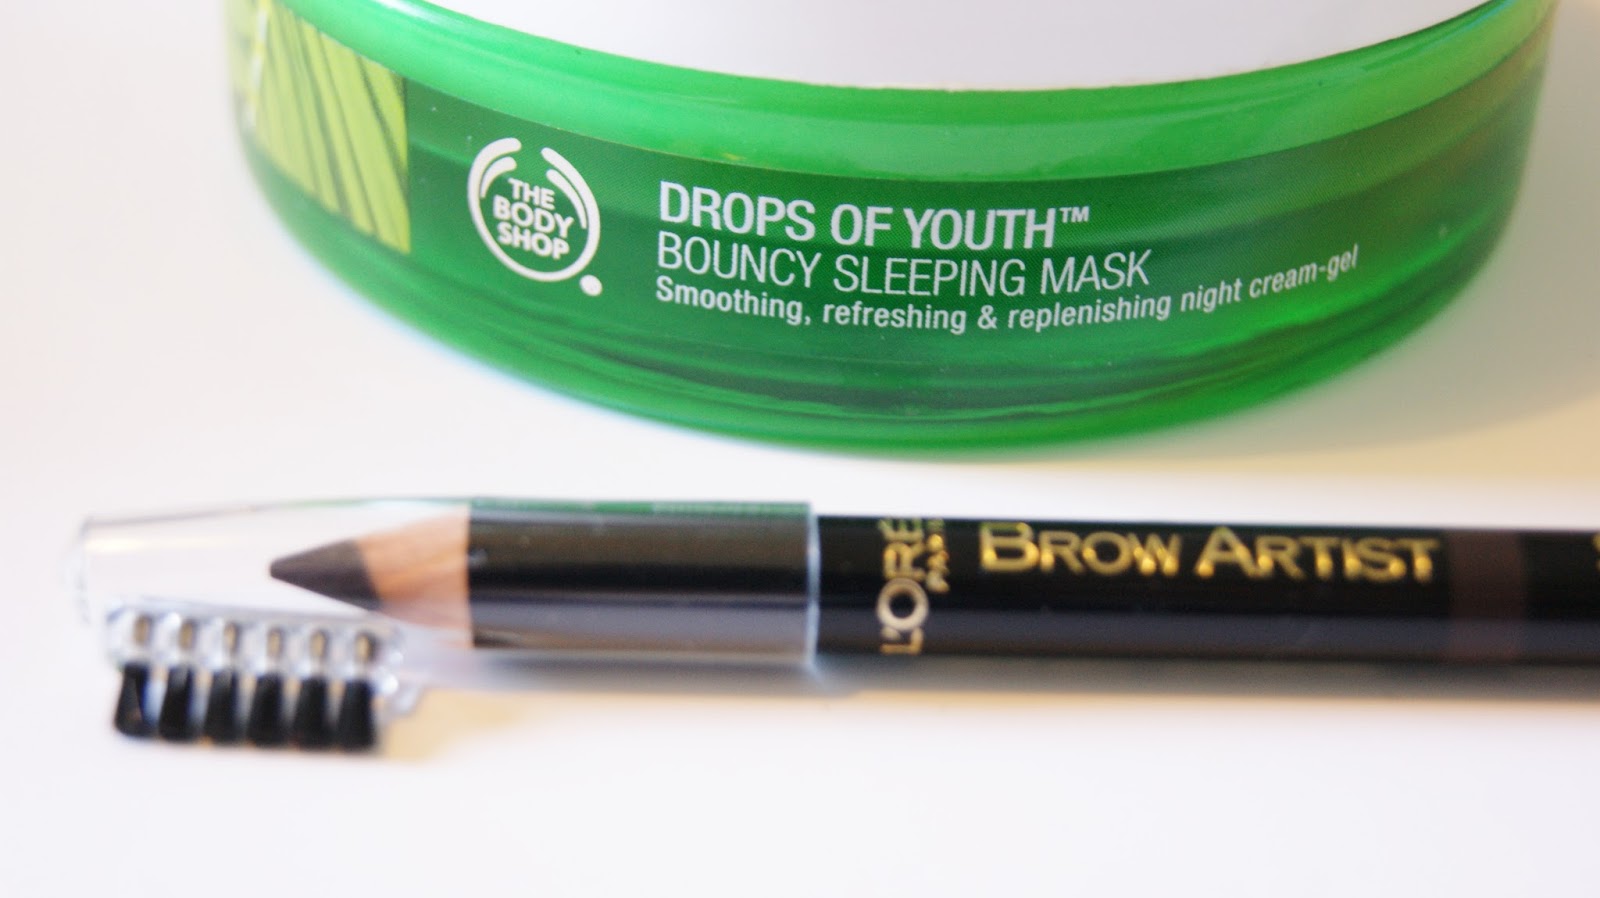 The Body Shop Drops of Youth Bouncy Sleeping Mask